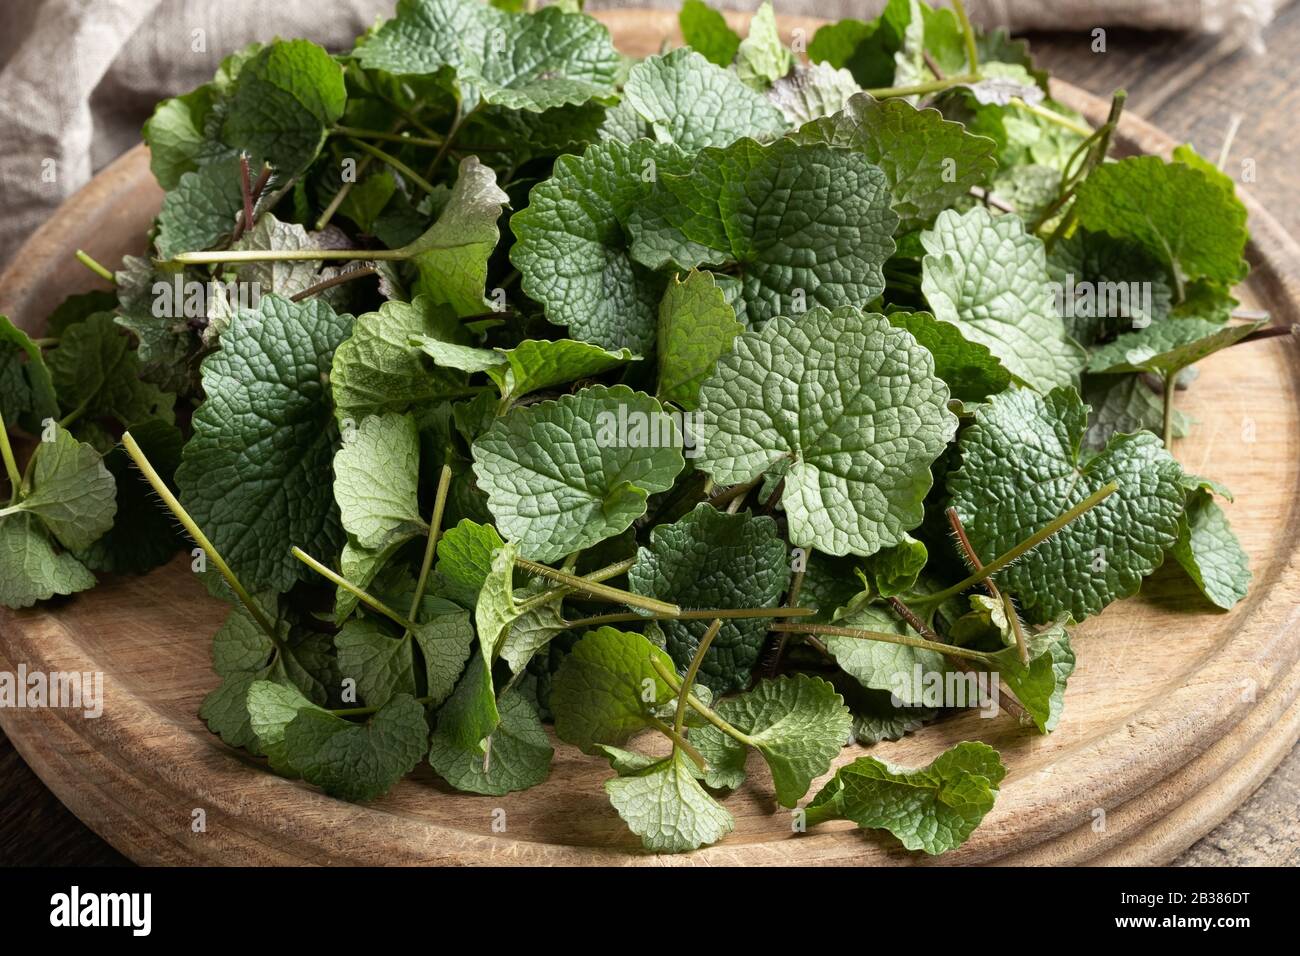 A heap of garlic mustard or Alliaria petiolata young leaves - a wild edible plant collected in early spring Stock Photo